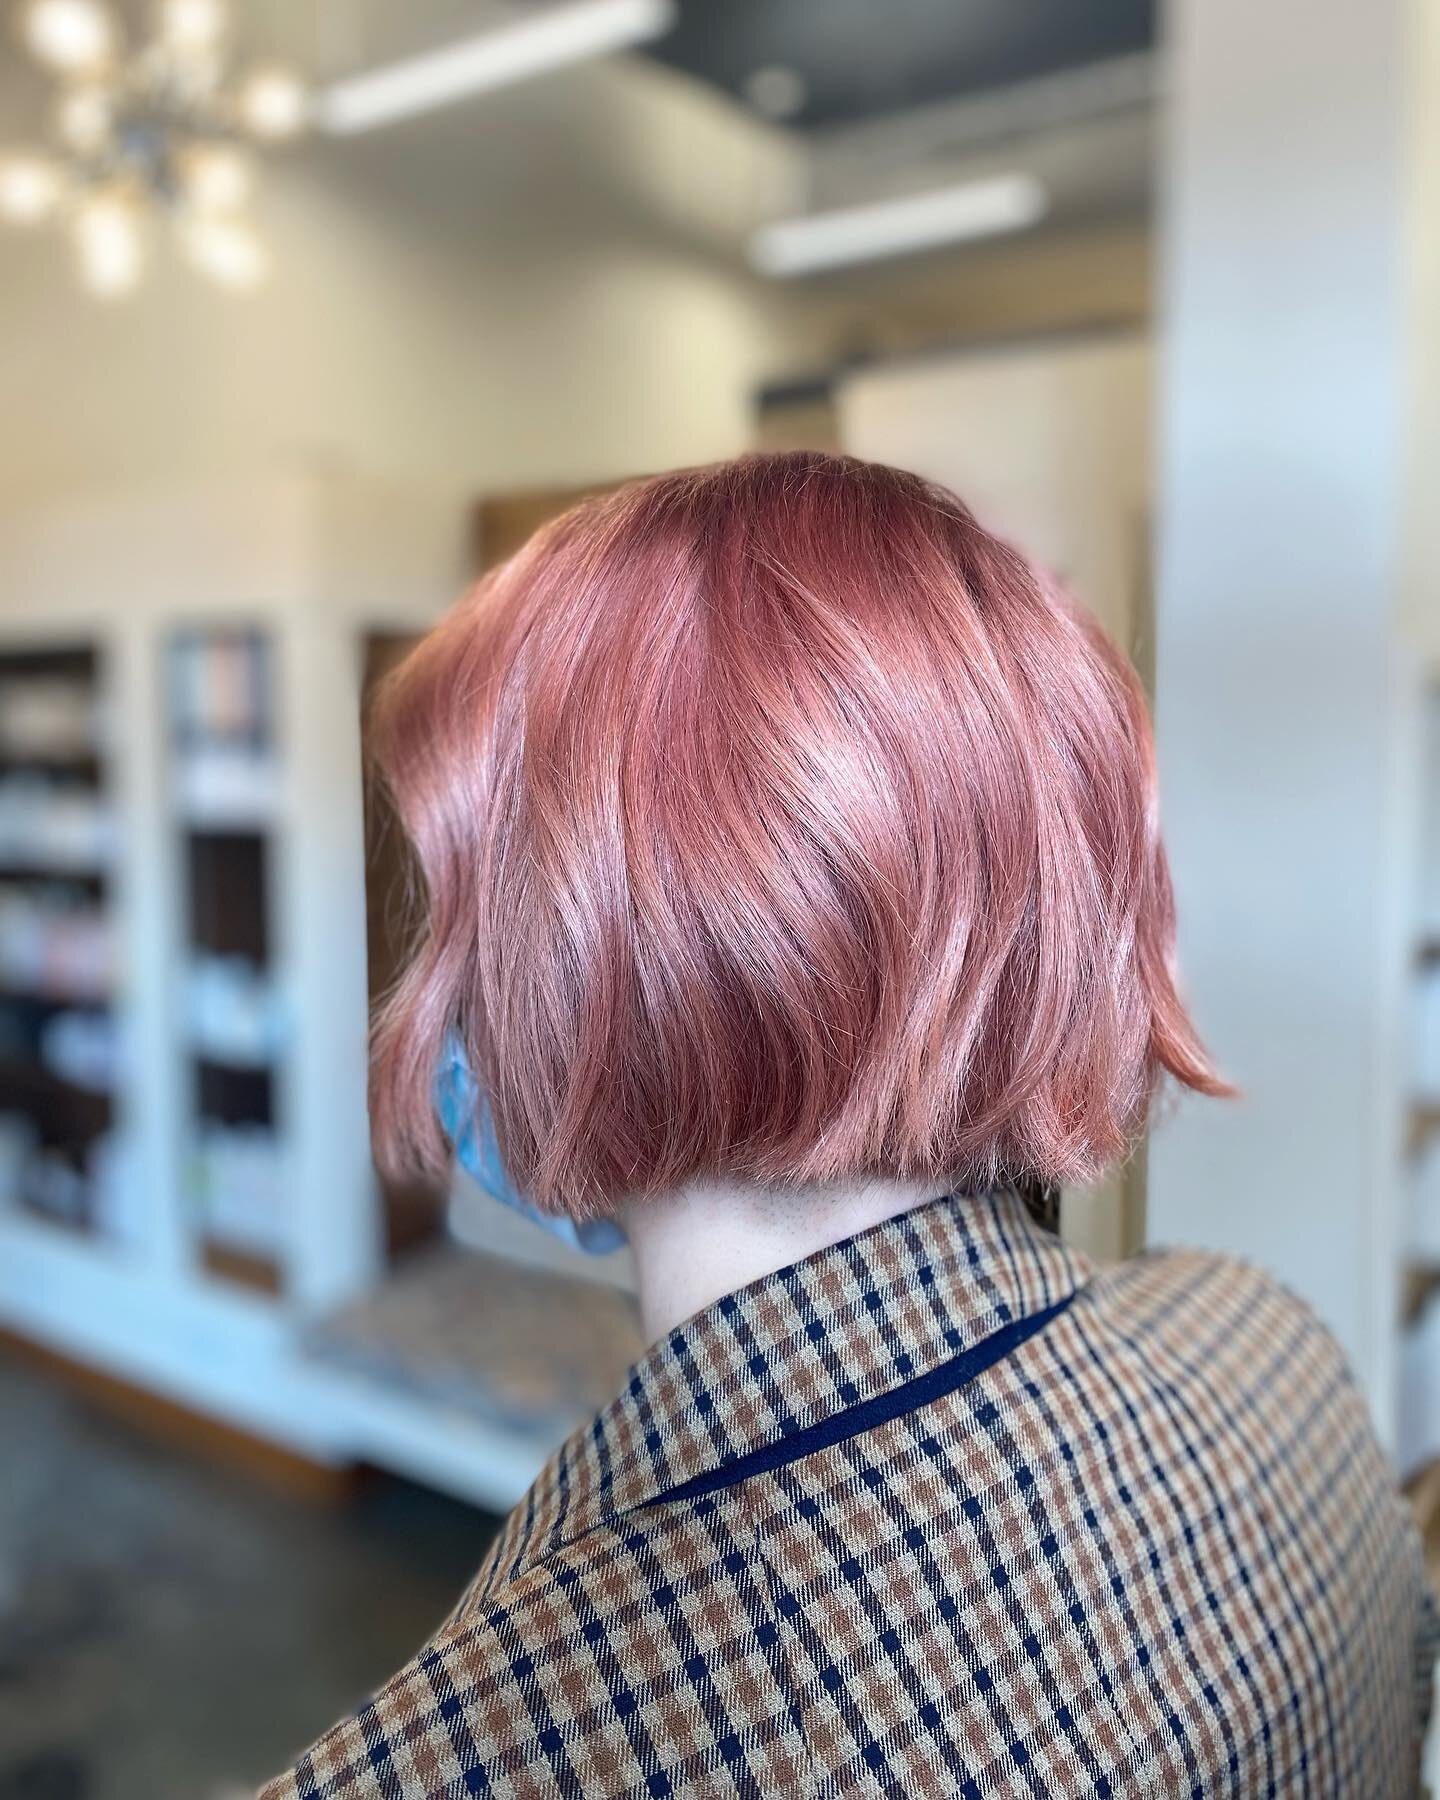 We are swooning over this fun and gorgeous color by @justinep_beauty 💗 Pink for fall is always a mood!